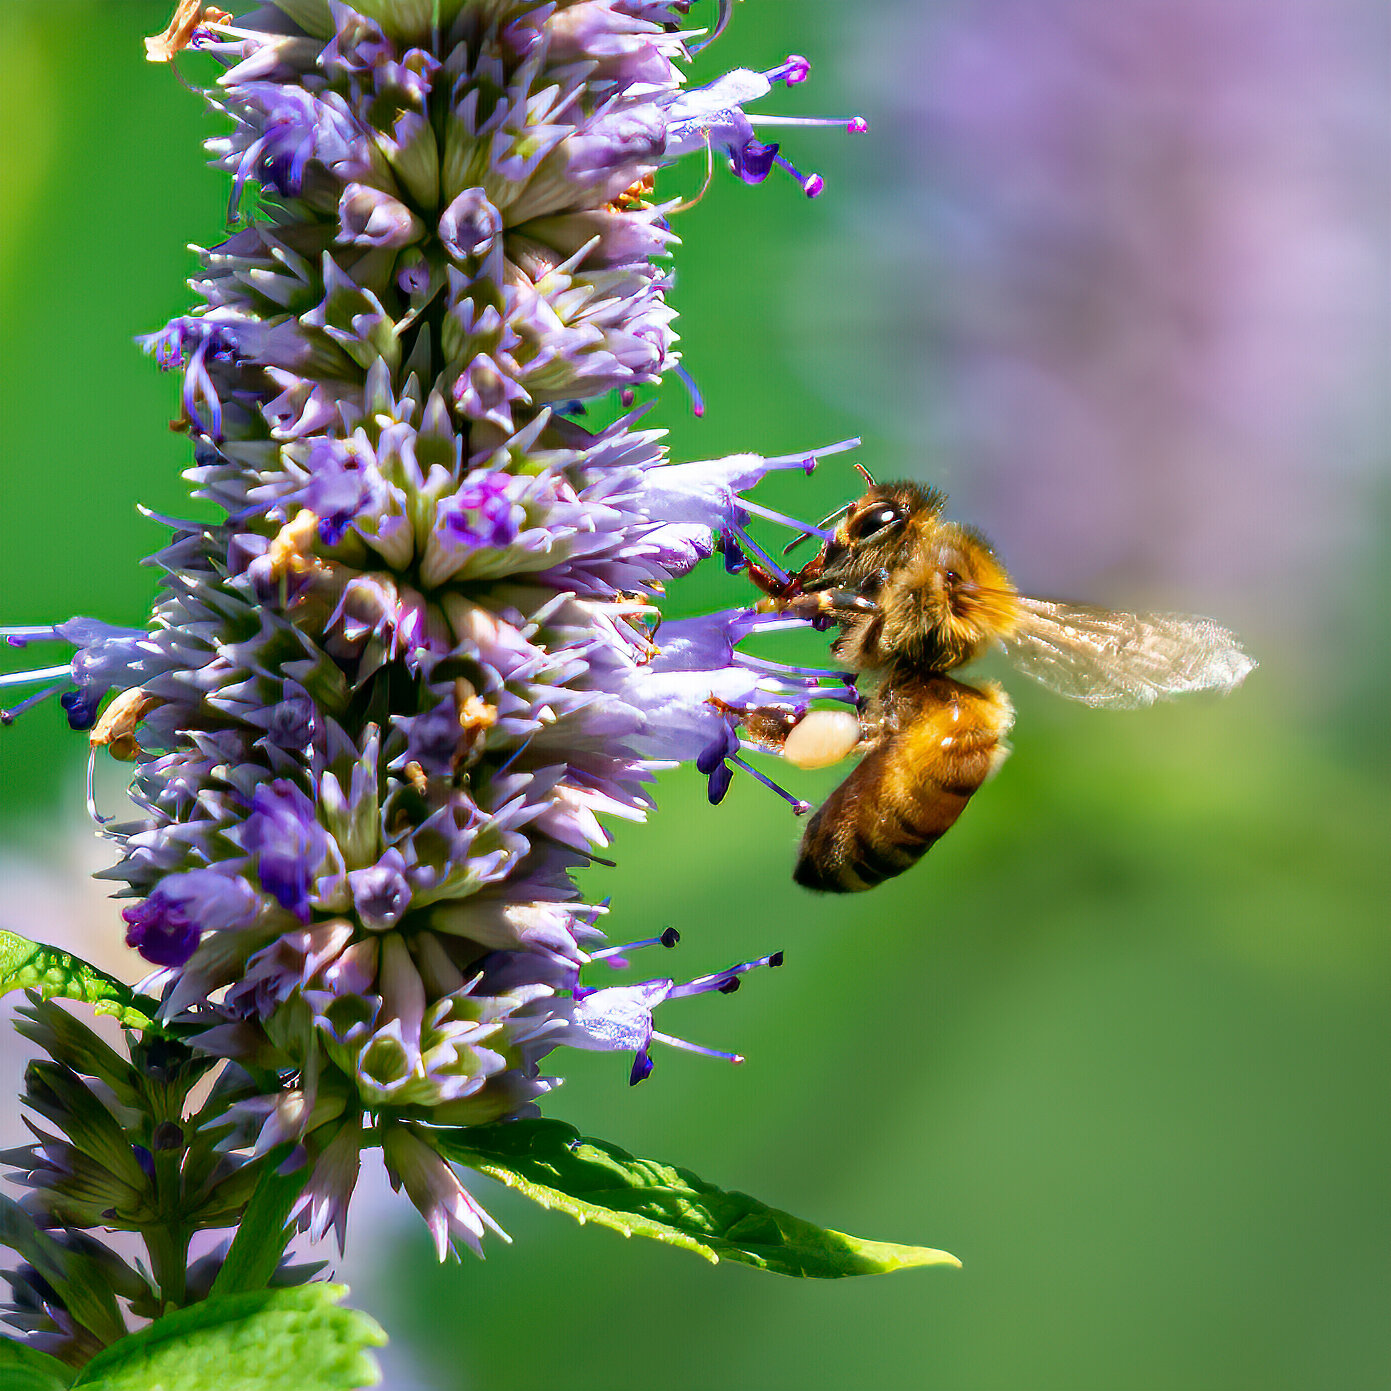 The European honeybee (Apis mellifera), feeding on anise hyssop (Agastache foeniculum), a North American native plant in the mint family, has undergone thousands of years of domestication. (Courtesy of Carl Jappe) 